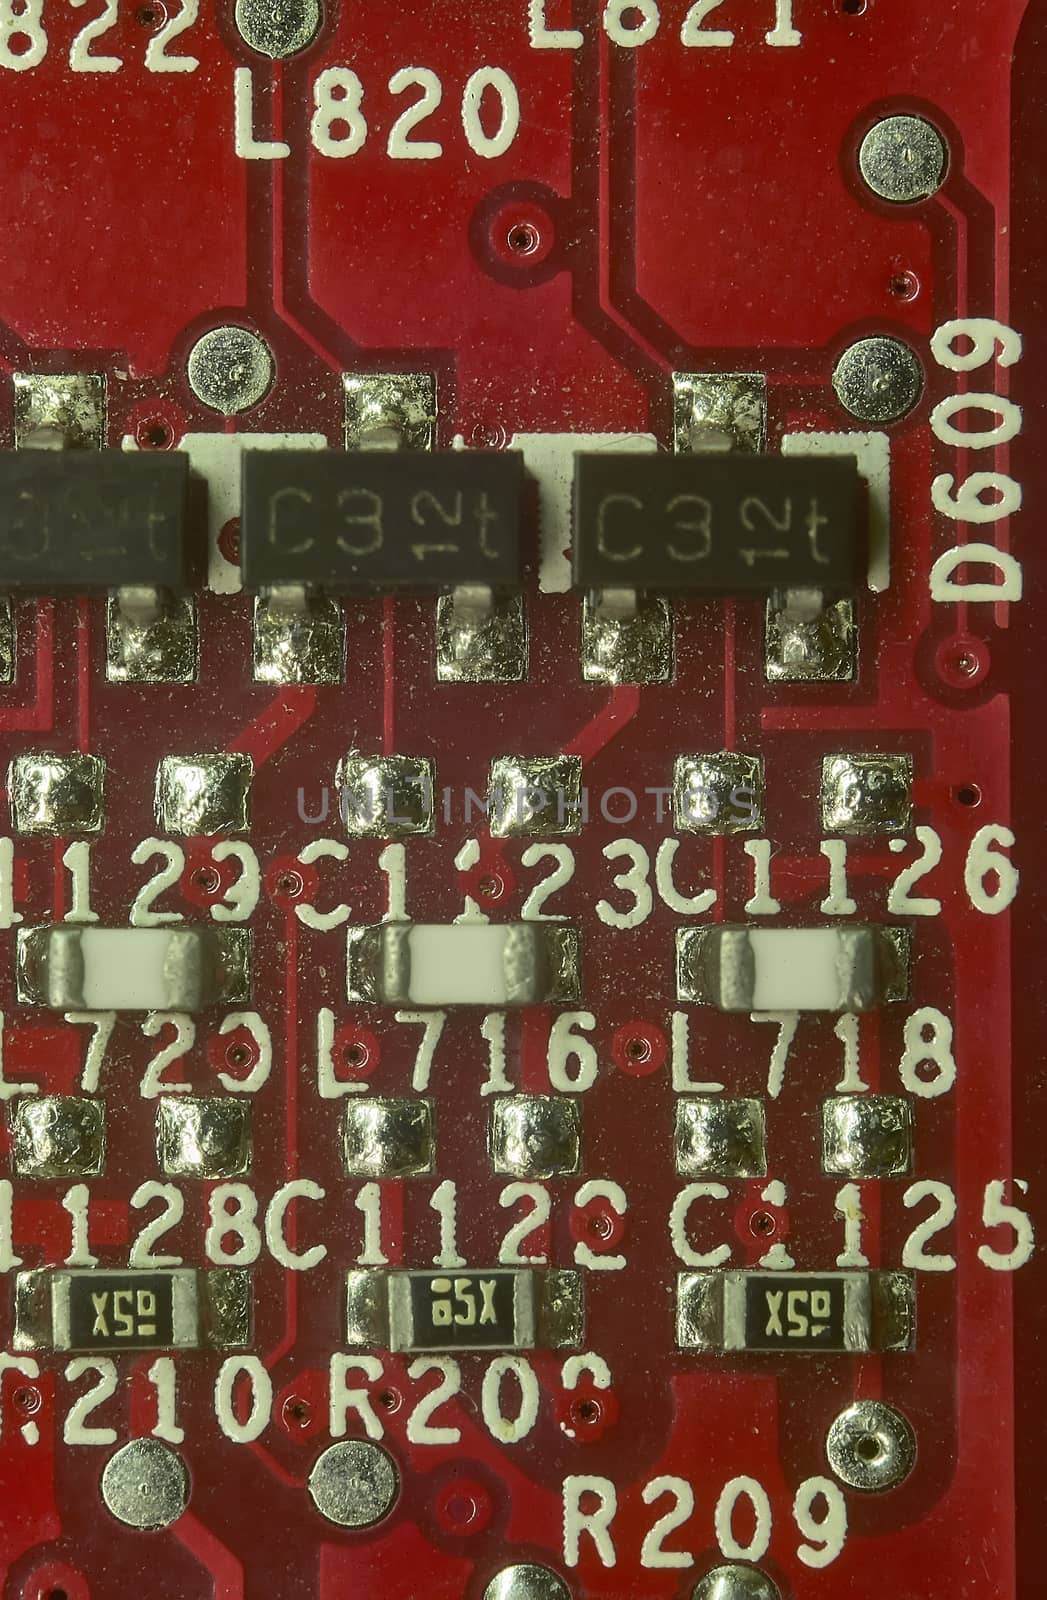 Detail of a detail of some electronic components such as resistors and capacitors mounted and welded on its electronic board.